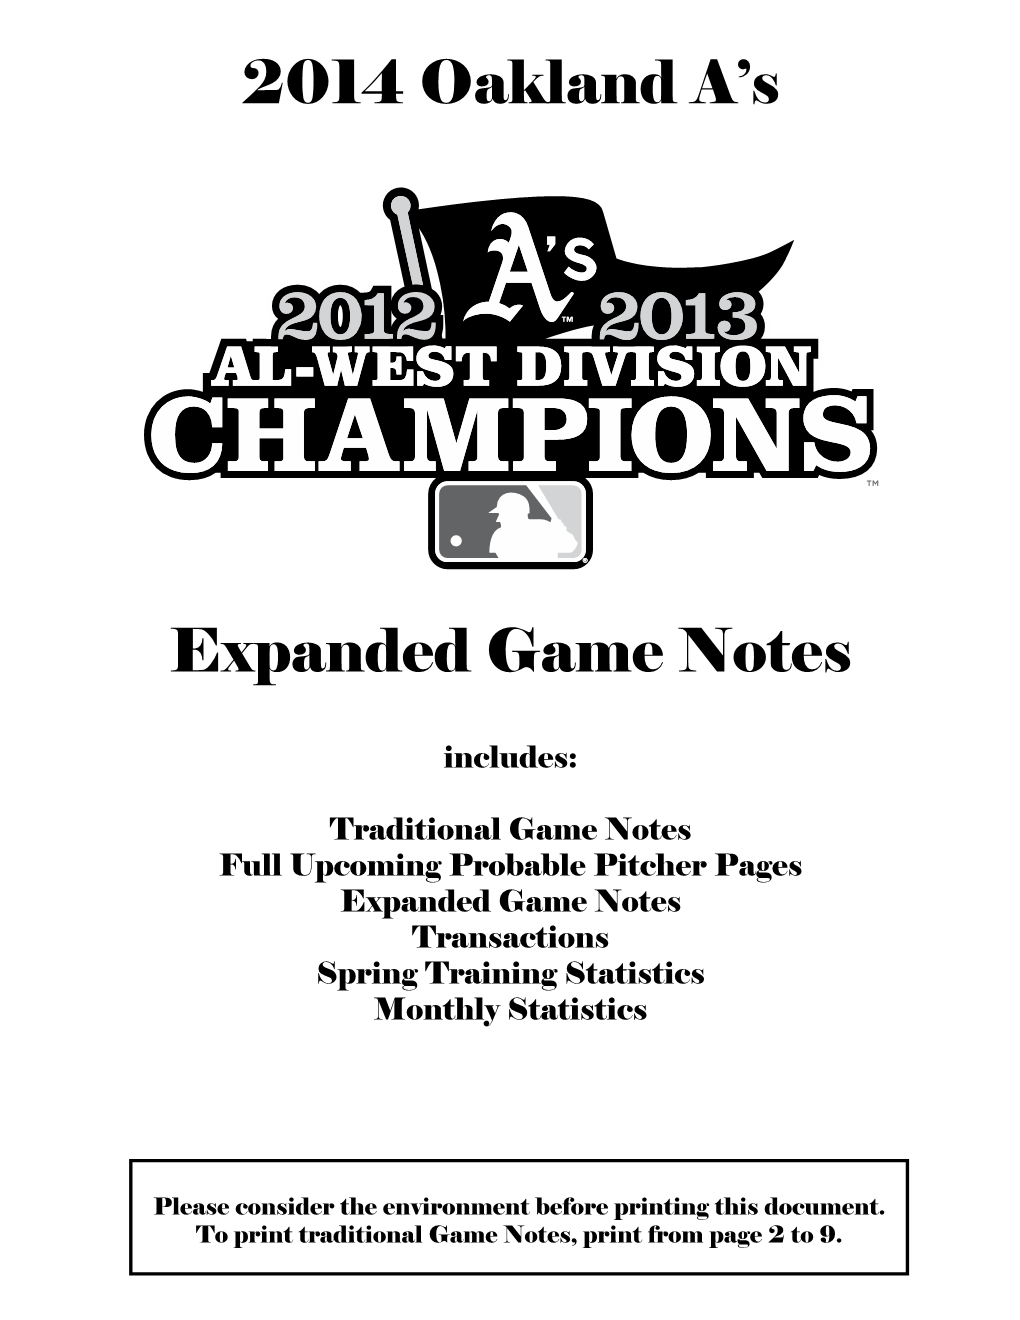 05-26-2014 A's Expanded Game Notes